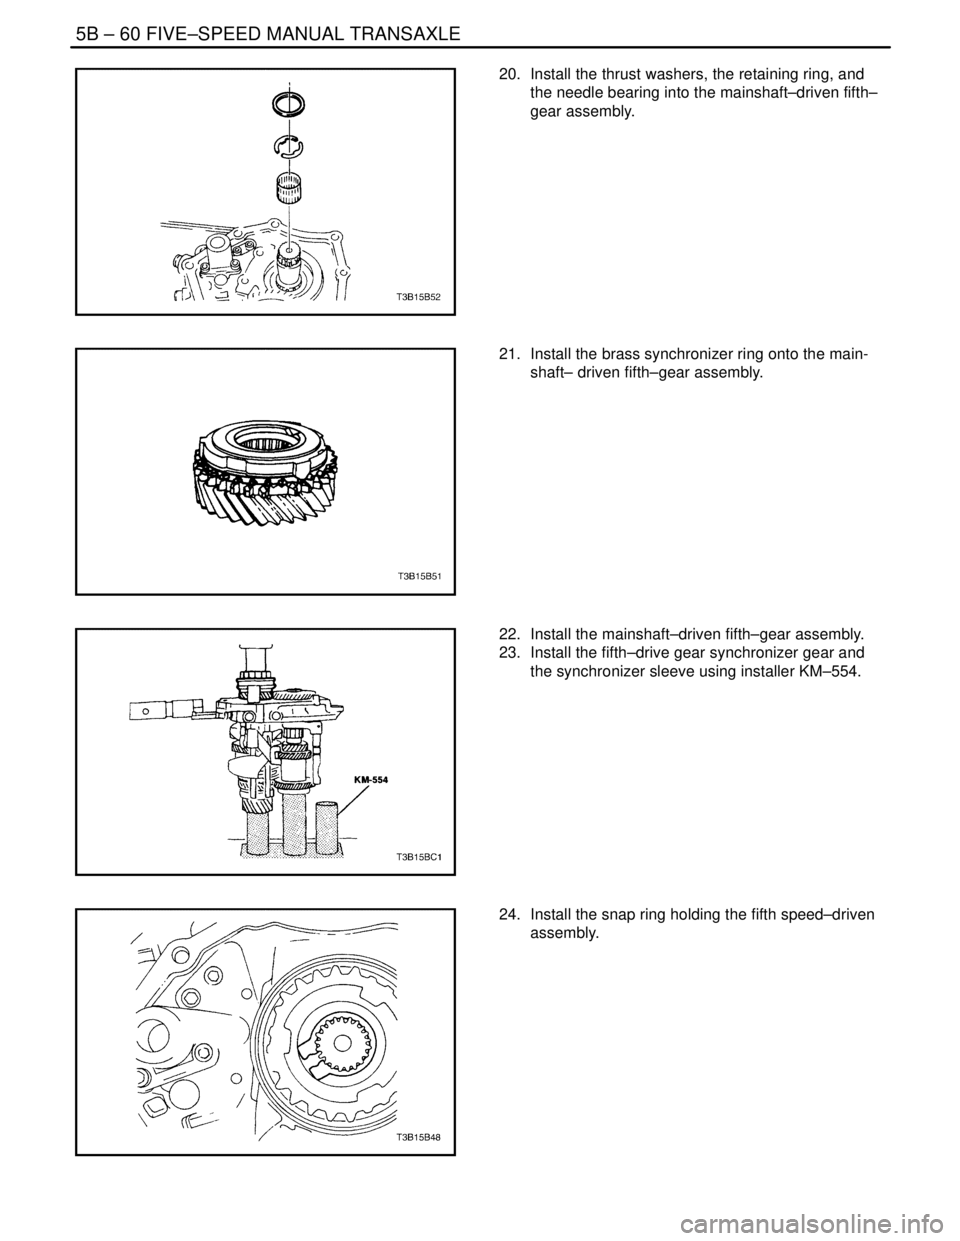 DAEWOO LACETTI 2004  Service Repair Manual 5B – 60IFIVE–SPEED MANUAL TRANSAXLE
DAEWOO V–121 BL4
20.  Install the thrust washers, the retaining ring, and
the needle bearing into the mainshaft–driven fifth–
gear assembly.
21.  Install 